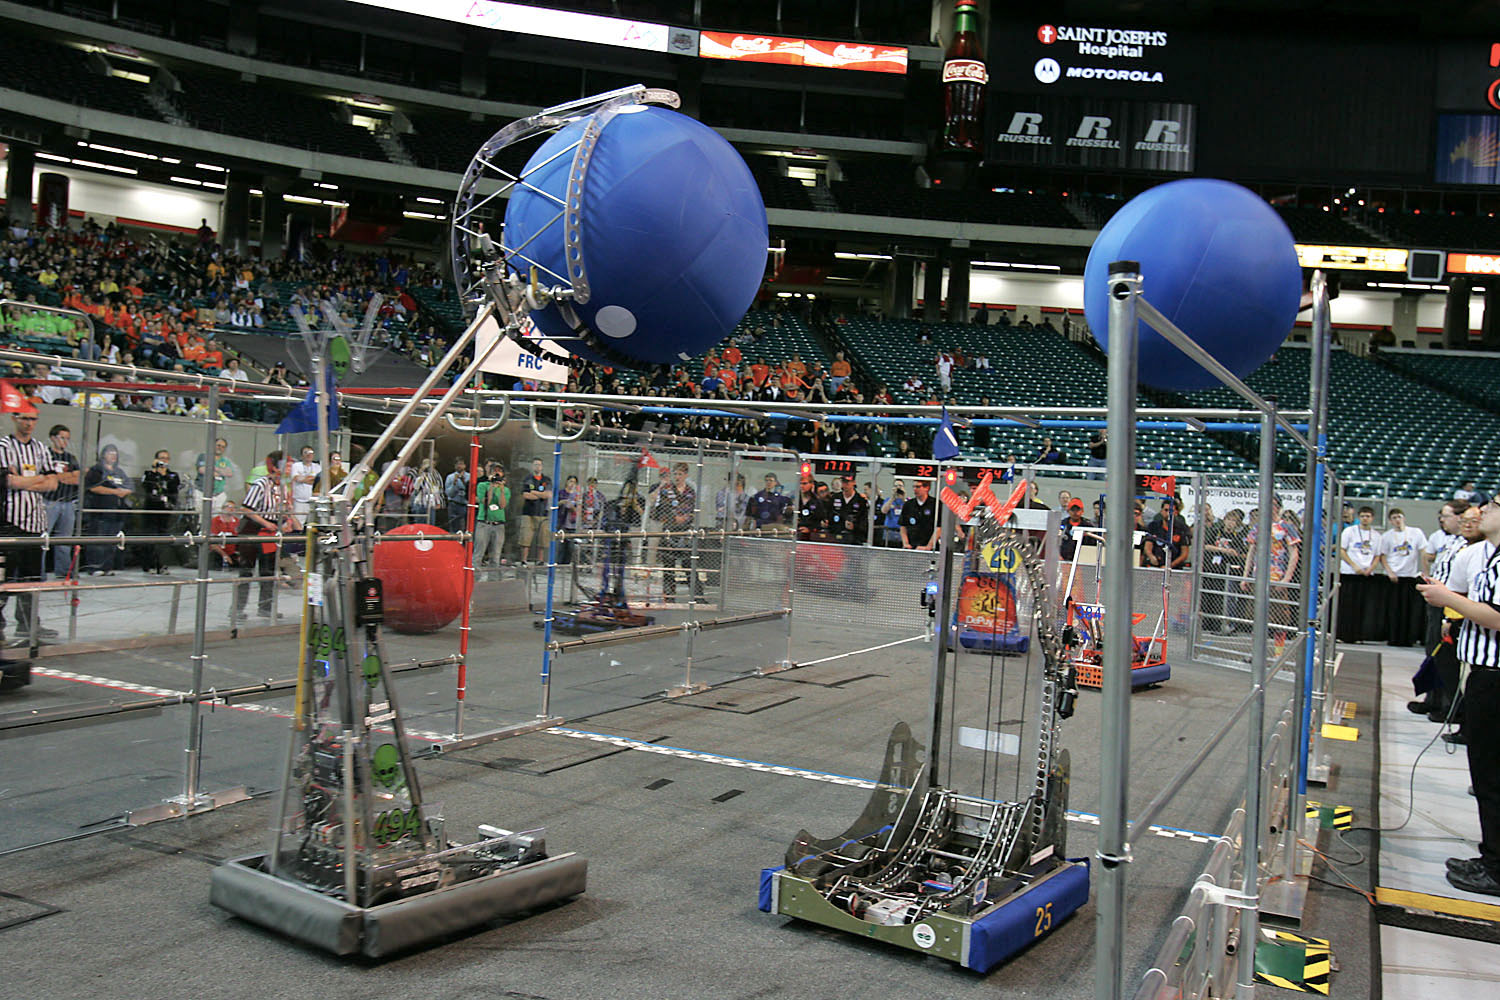 Robots scored points by maneuvering spheres around a track and over obstacles.